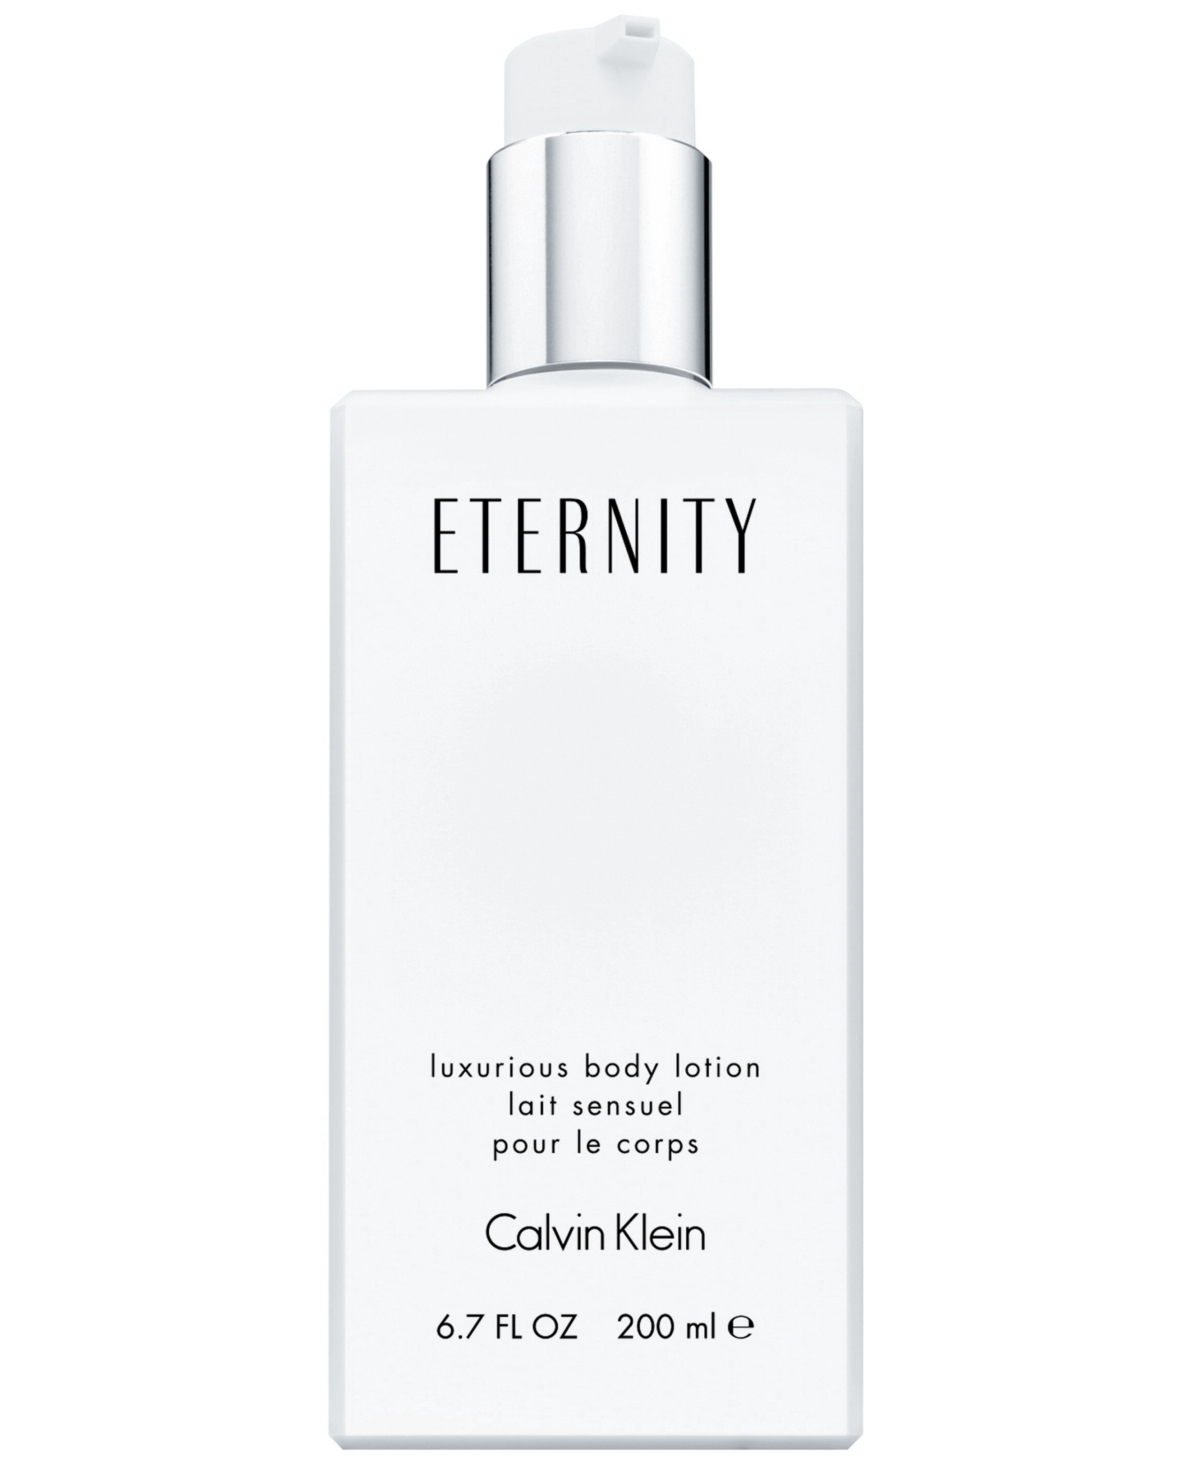 EAN 3607342123465 product image for Calvin Klein Eternity Luxurious Body Lotion, 6.7 oz | upcitemdb.com